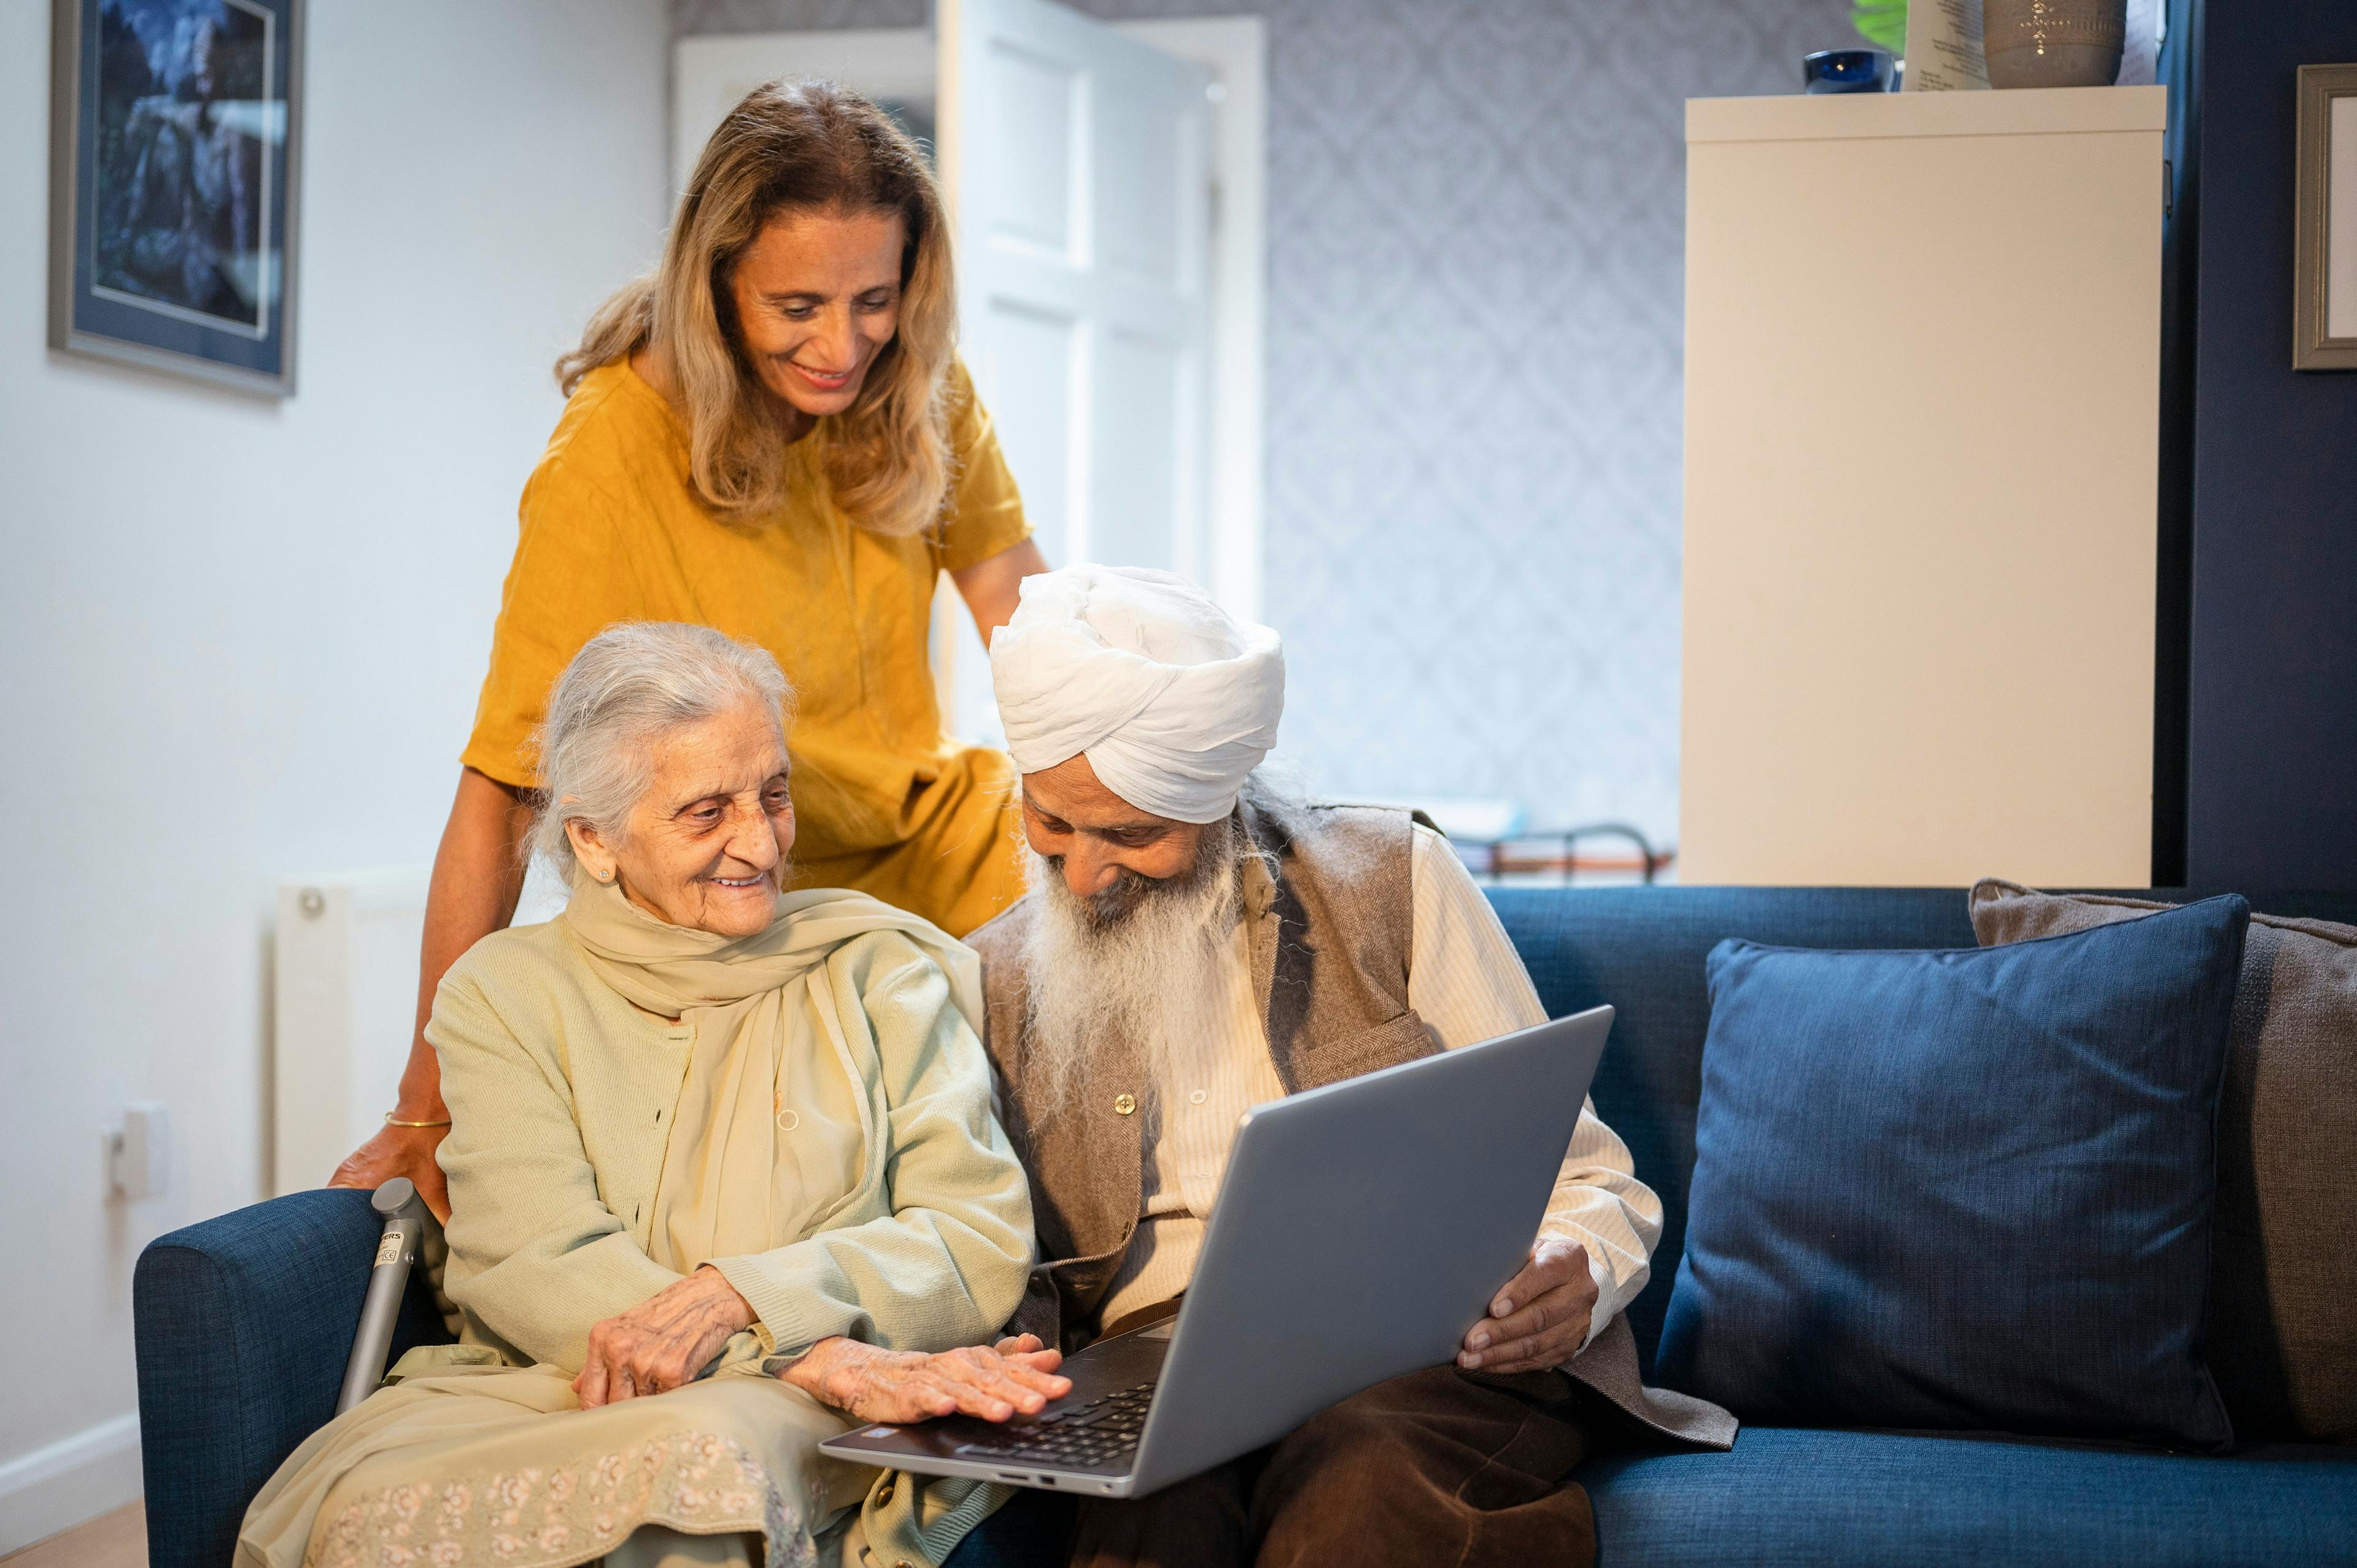 Two older adults using a laptop, being helped by a younger woman